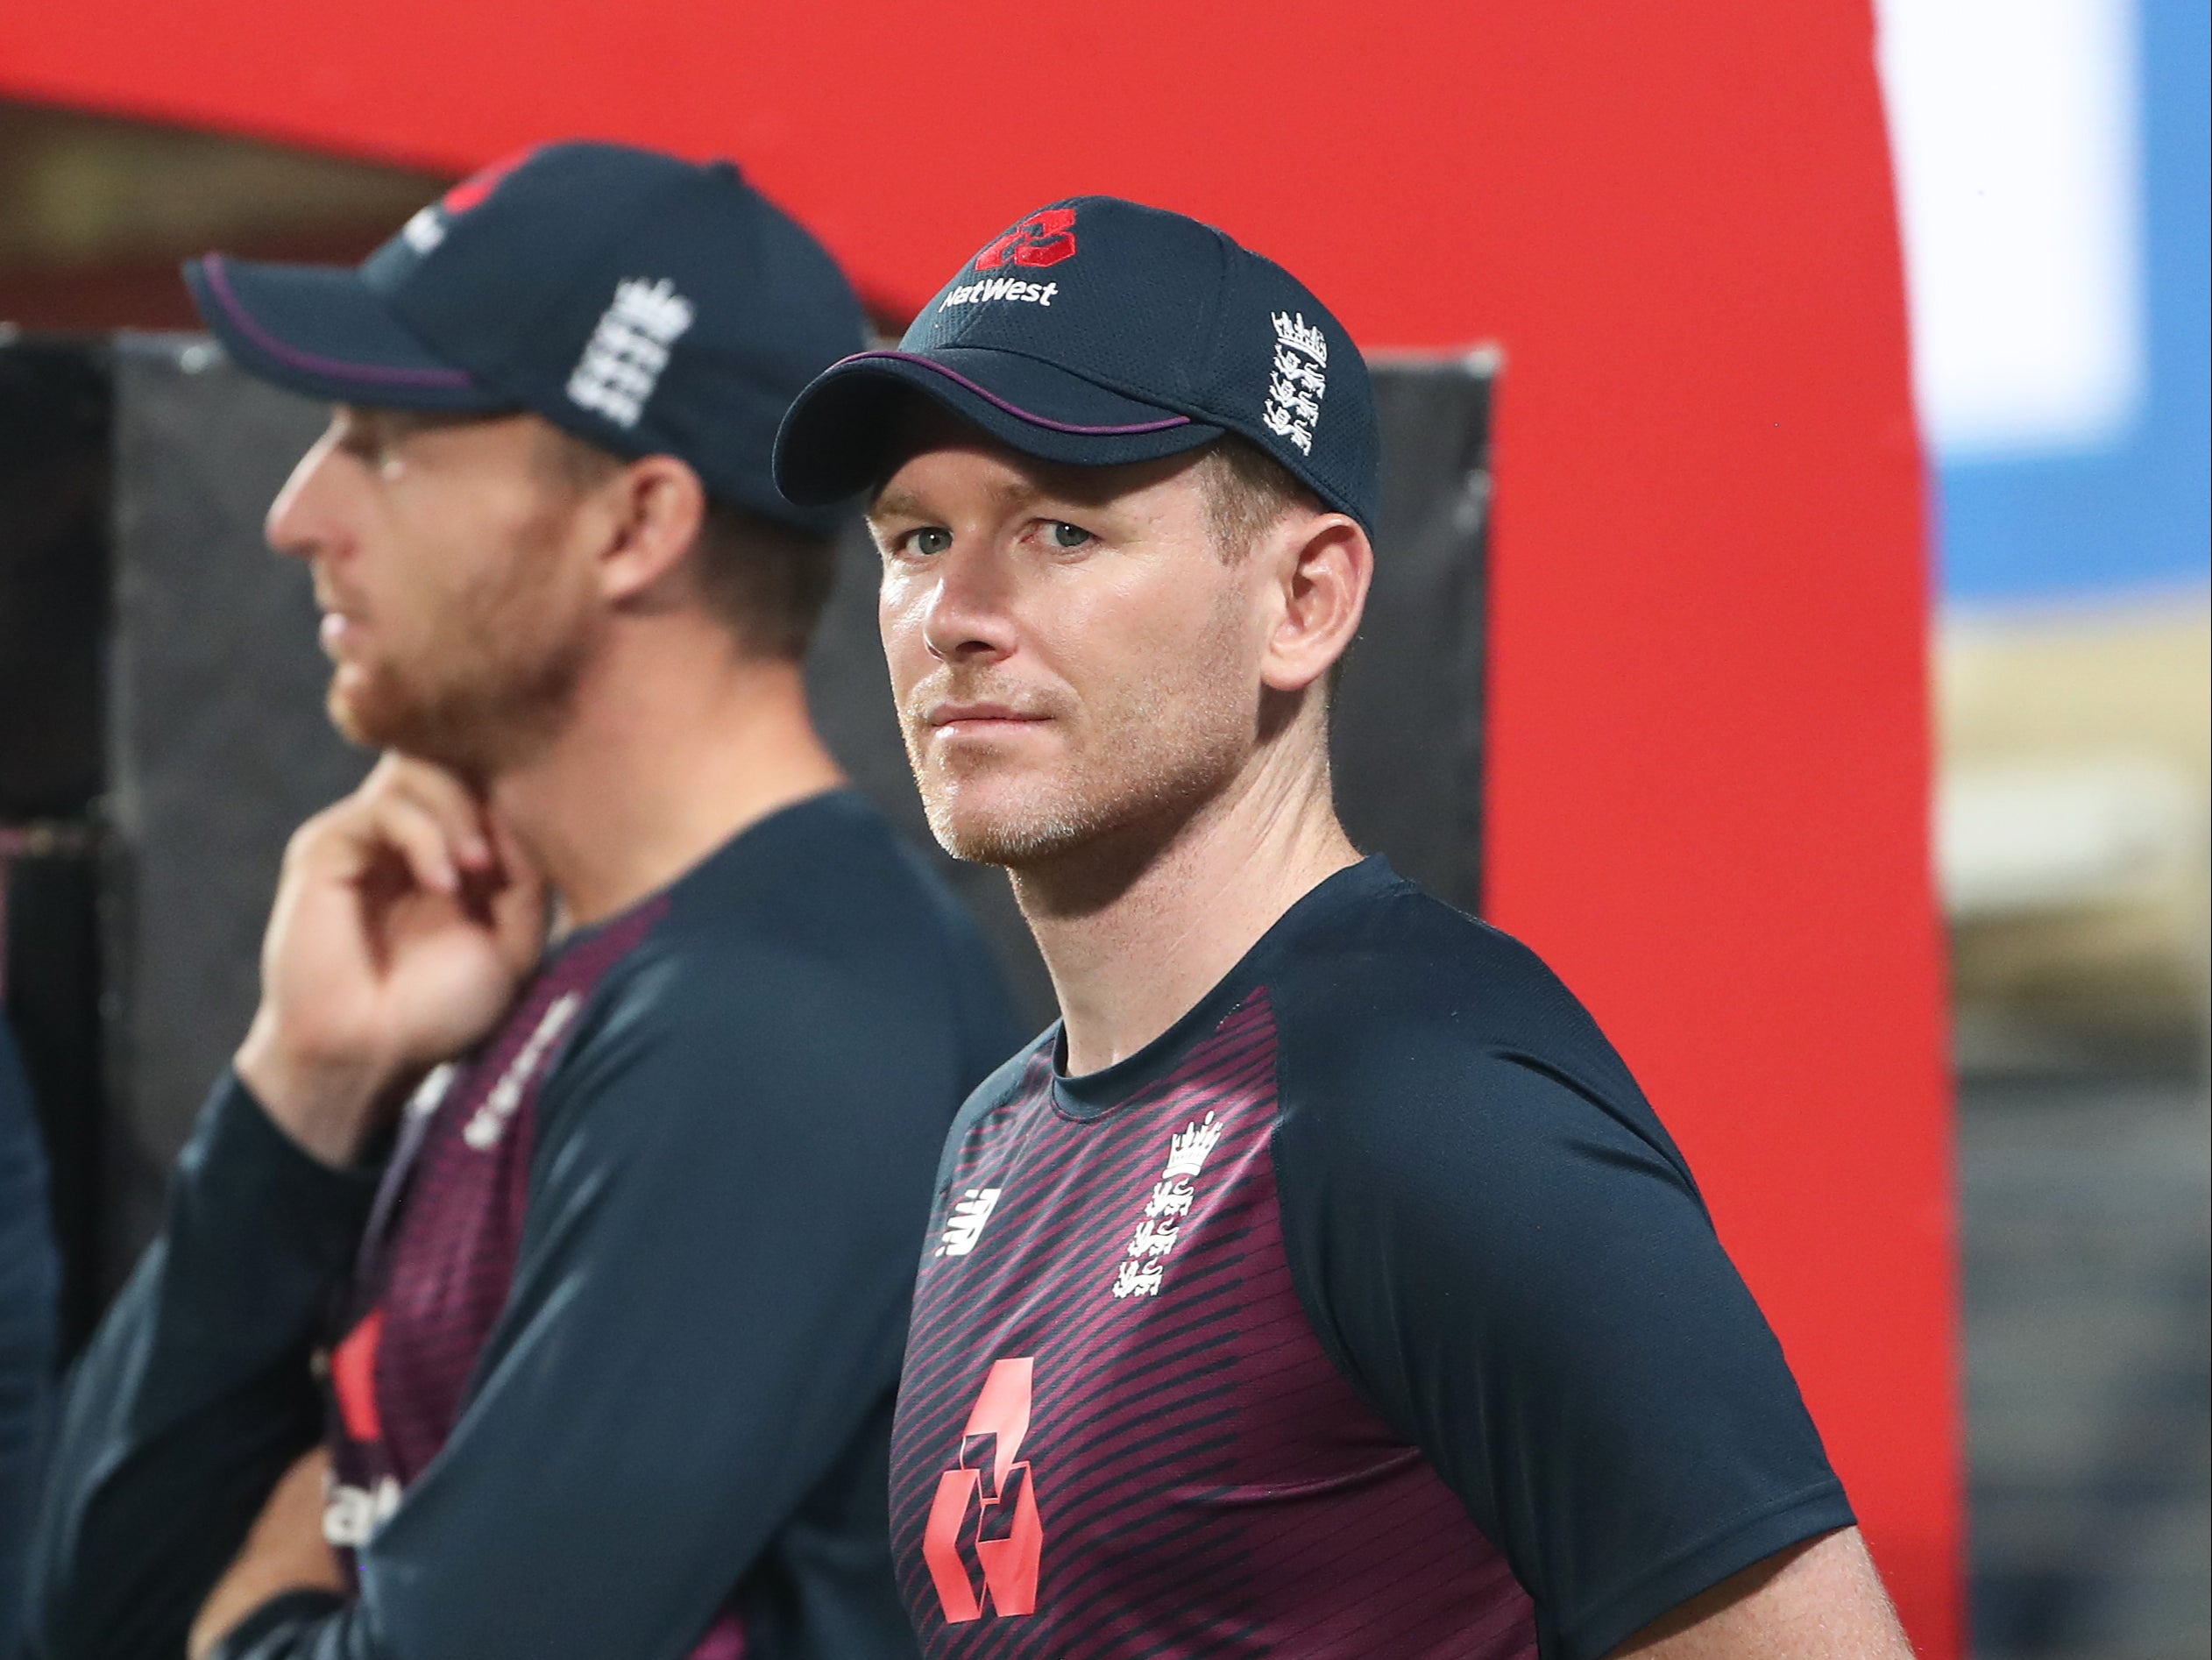 Eoin Morgan is excited by the timing of lockdown restrictions easing